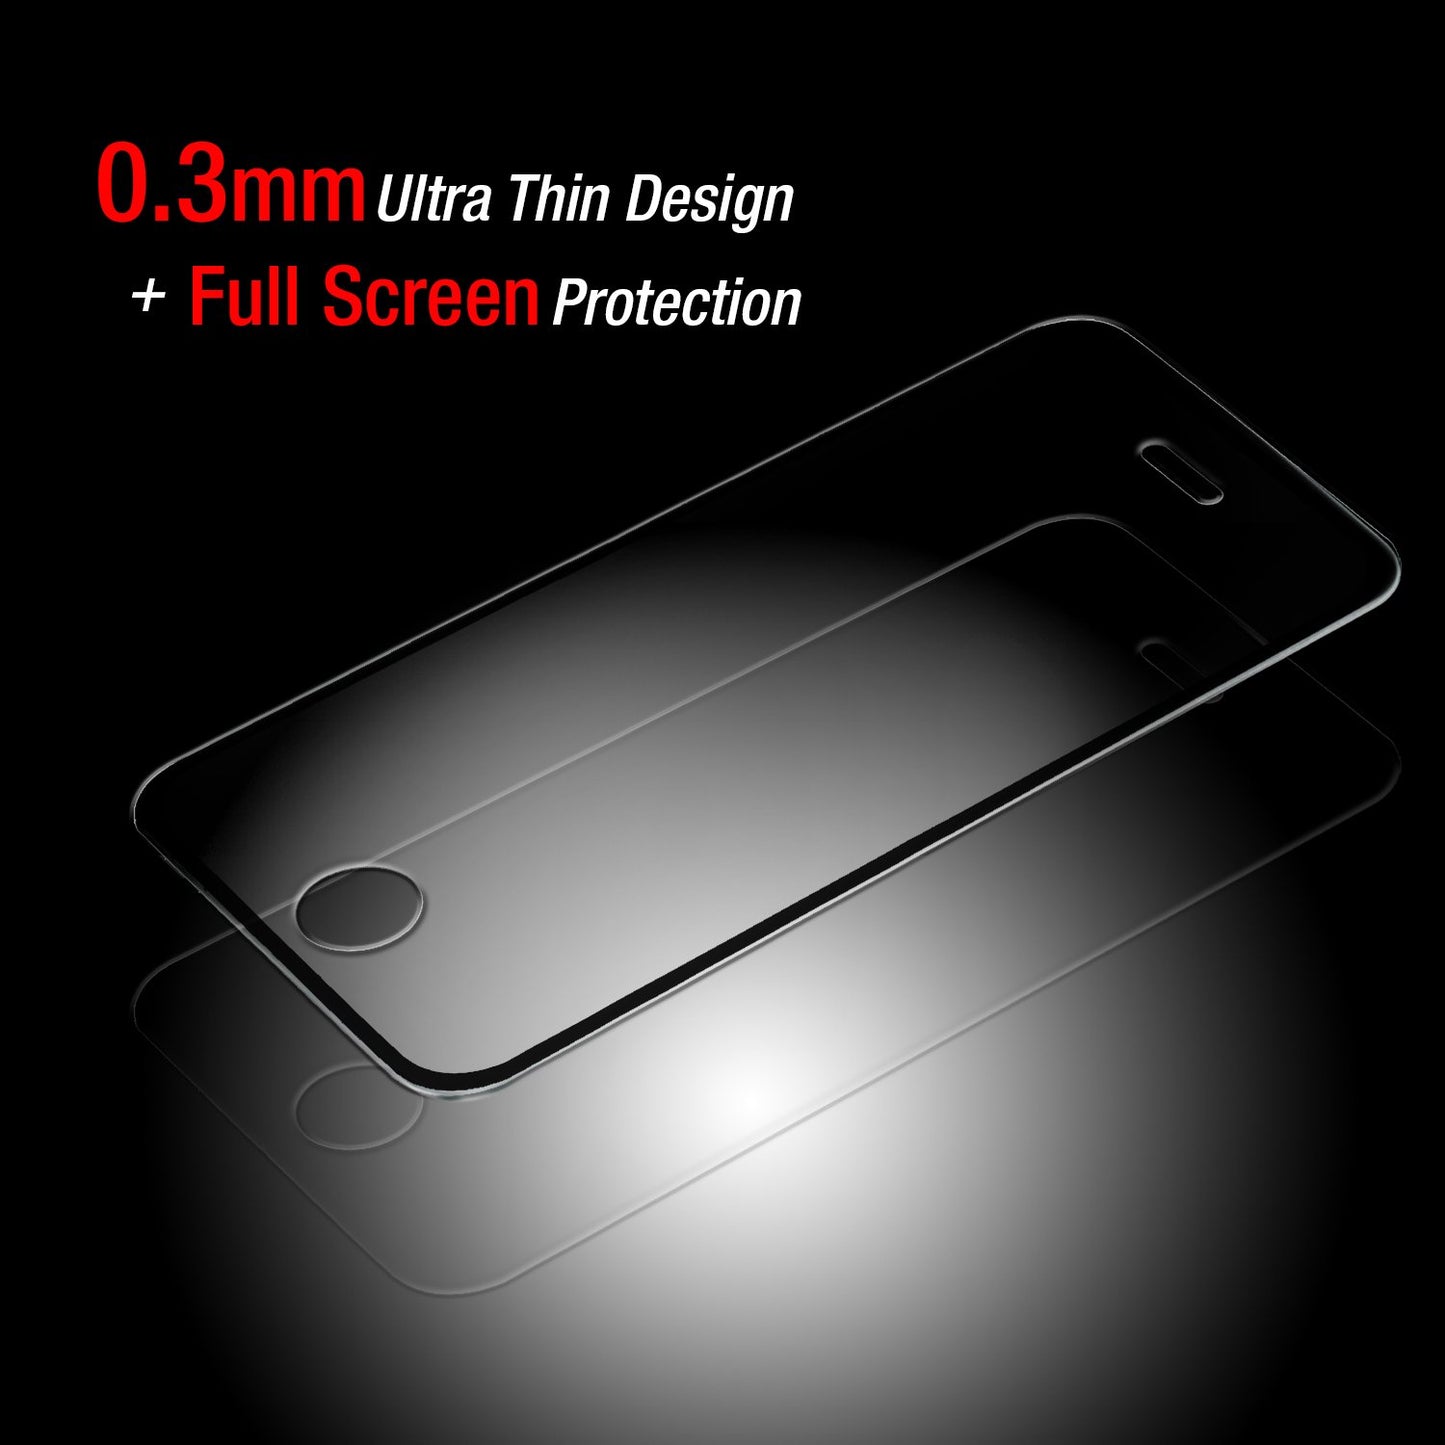 SGSAMN8F - Case friendly Tempered Glass Screen Protector for Samsung Galaxy Note 8, Premium Quality- Full Coverage 3D Surface- by Cellet